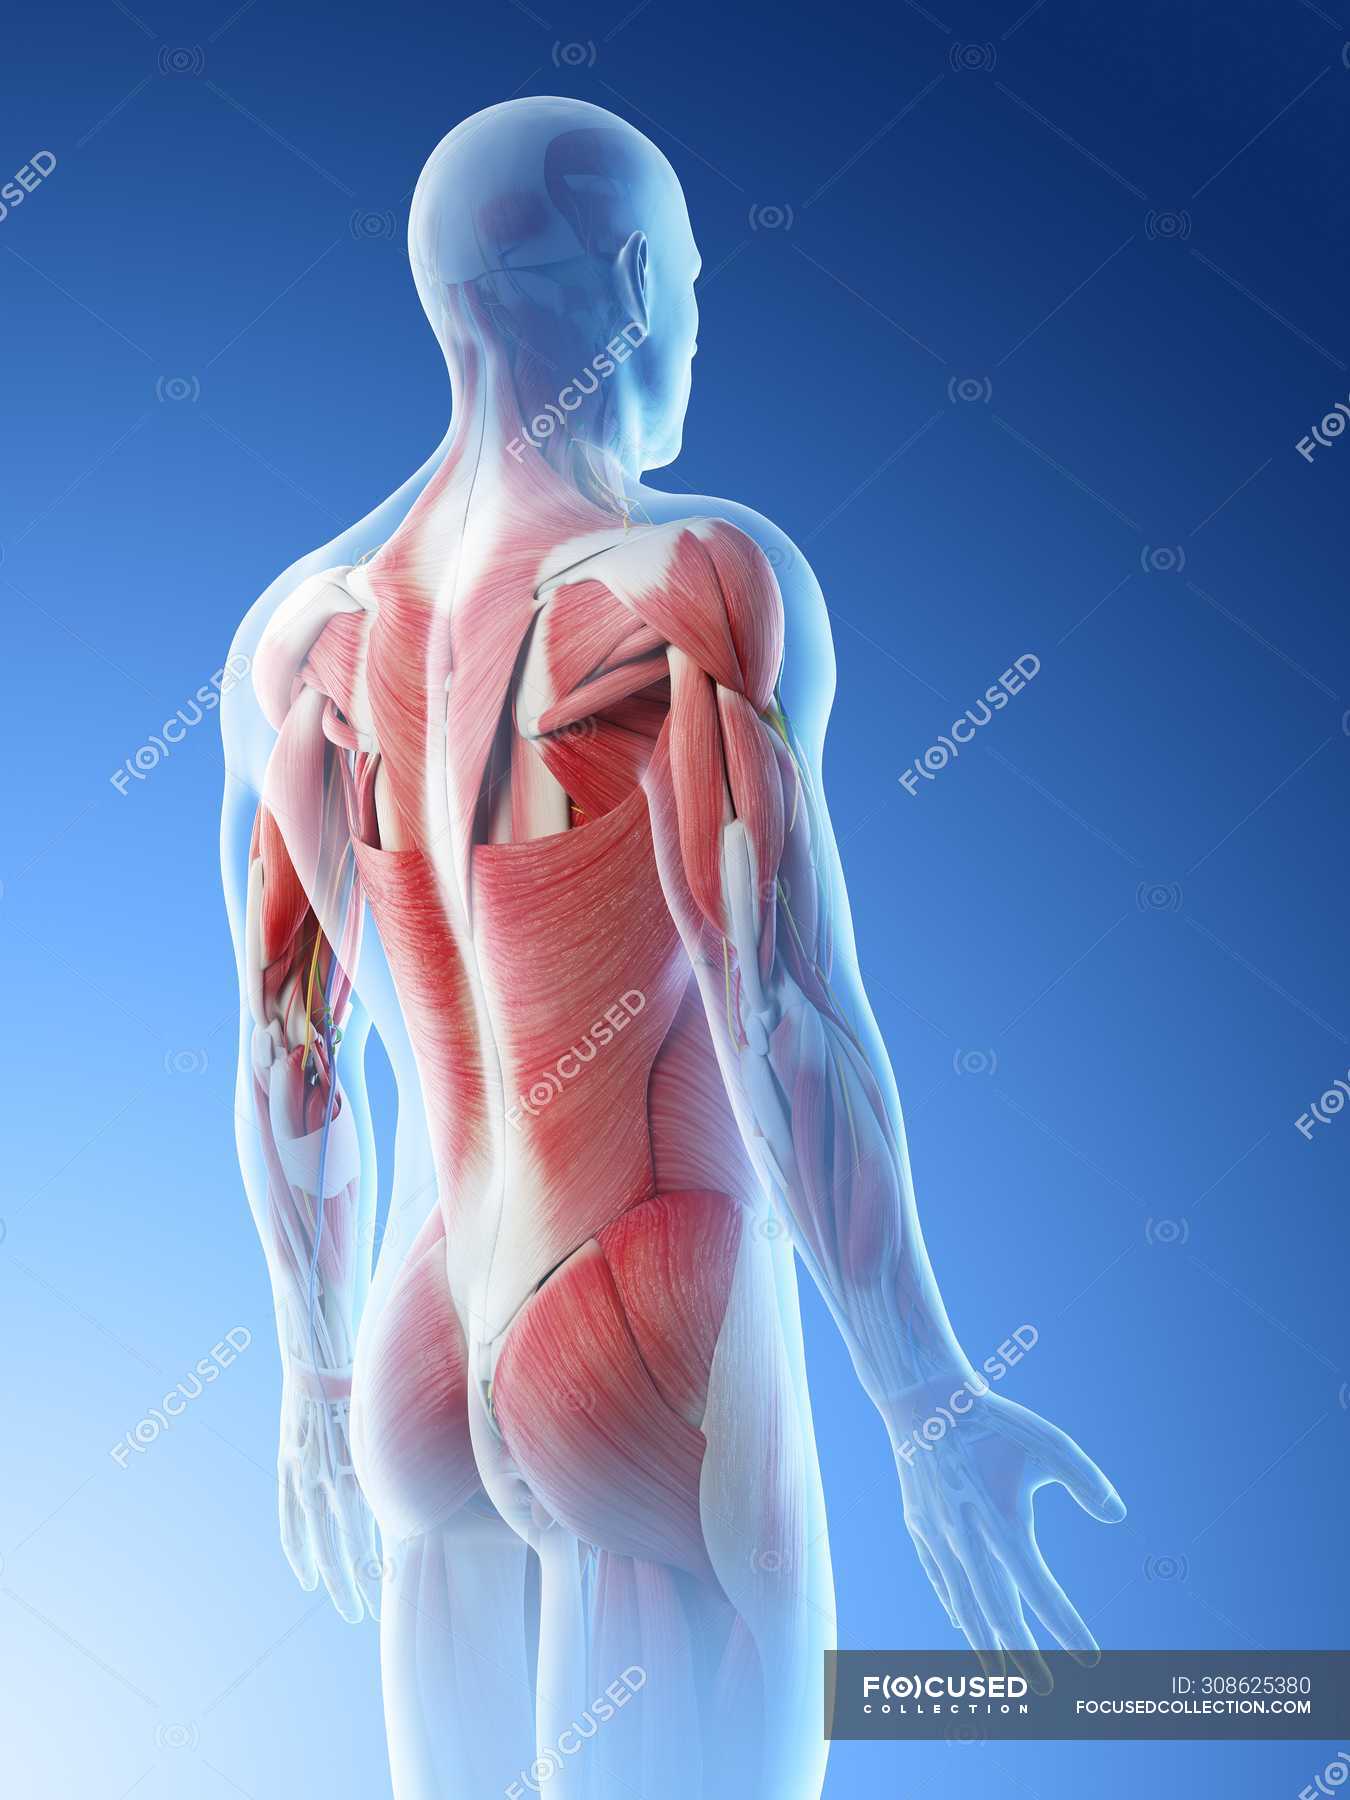 Male Body With Back Muscles Computer Illustration Digital Artwork Stock Photo 308625380